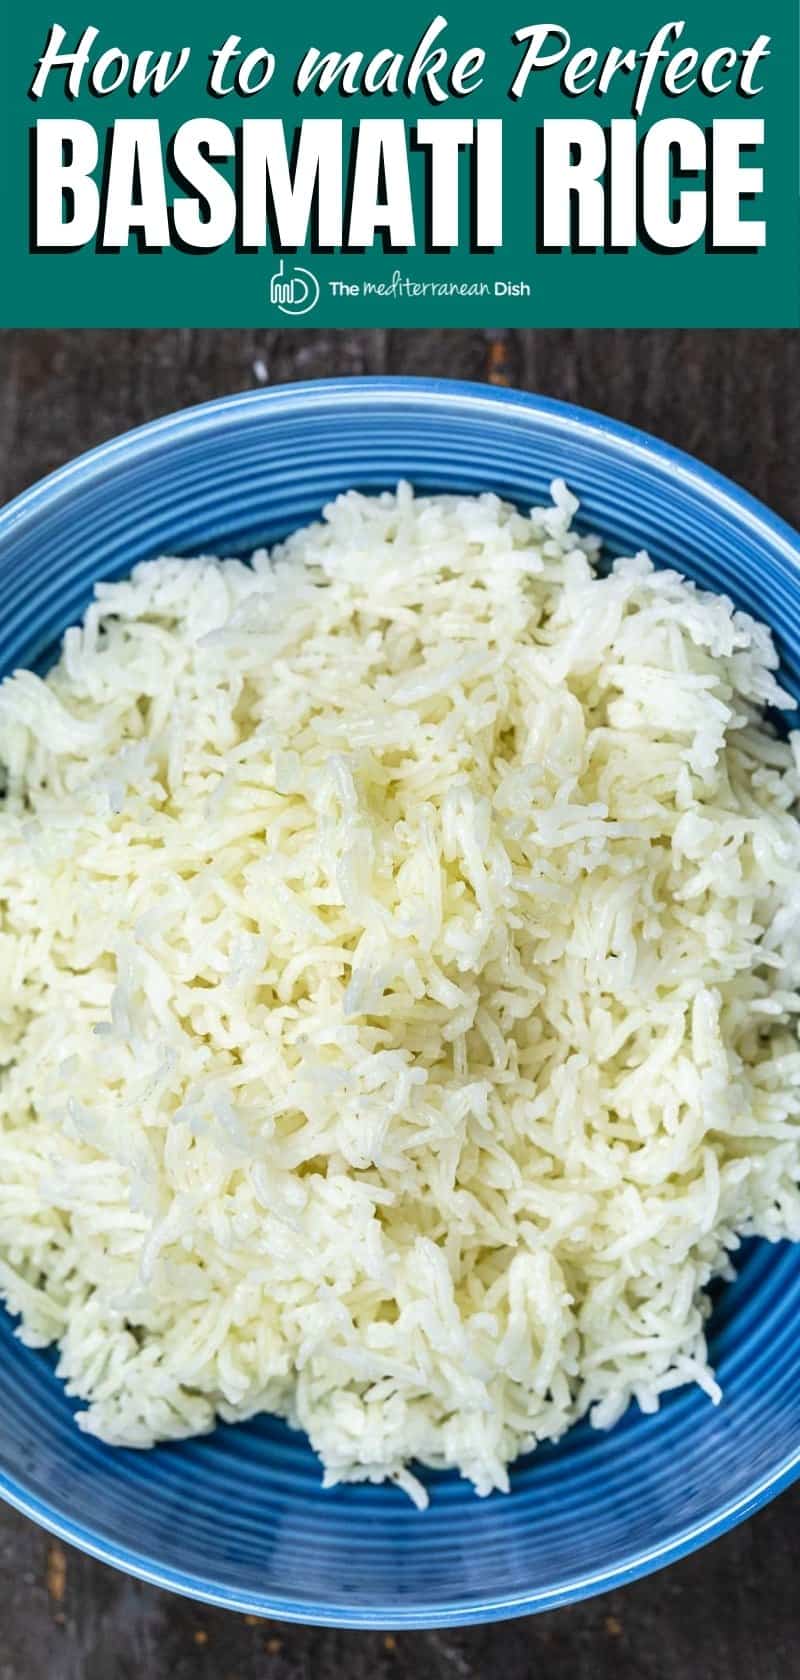 How to Cook Basmati Rice Recipe (Two Ways) l The Mediterranean Dish